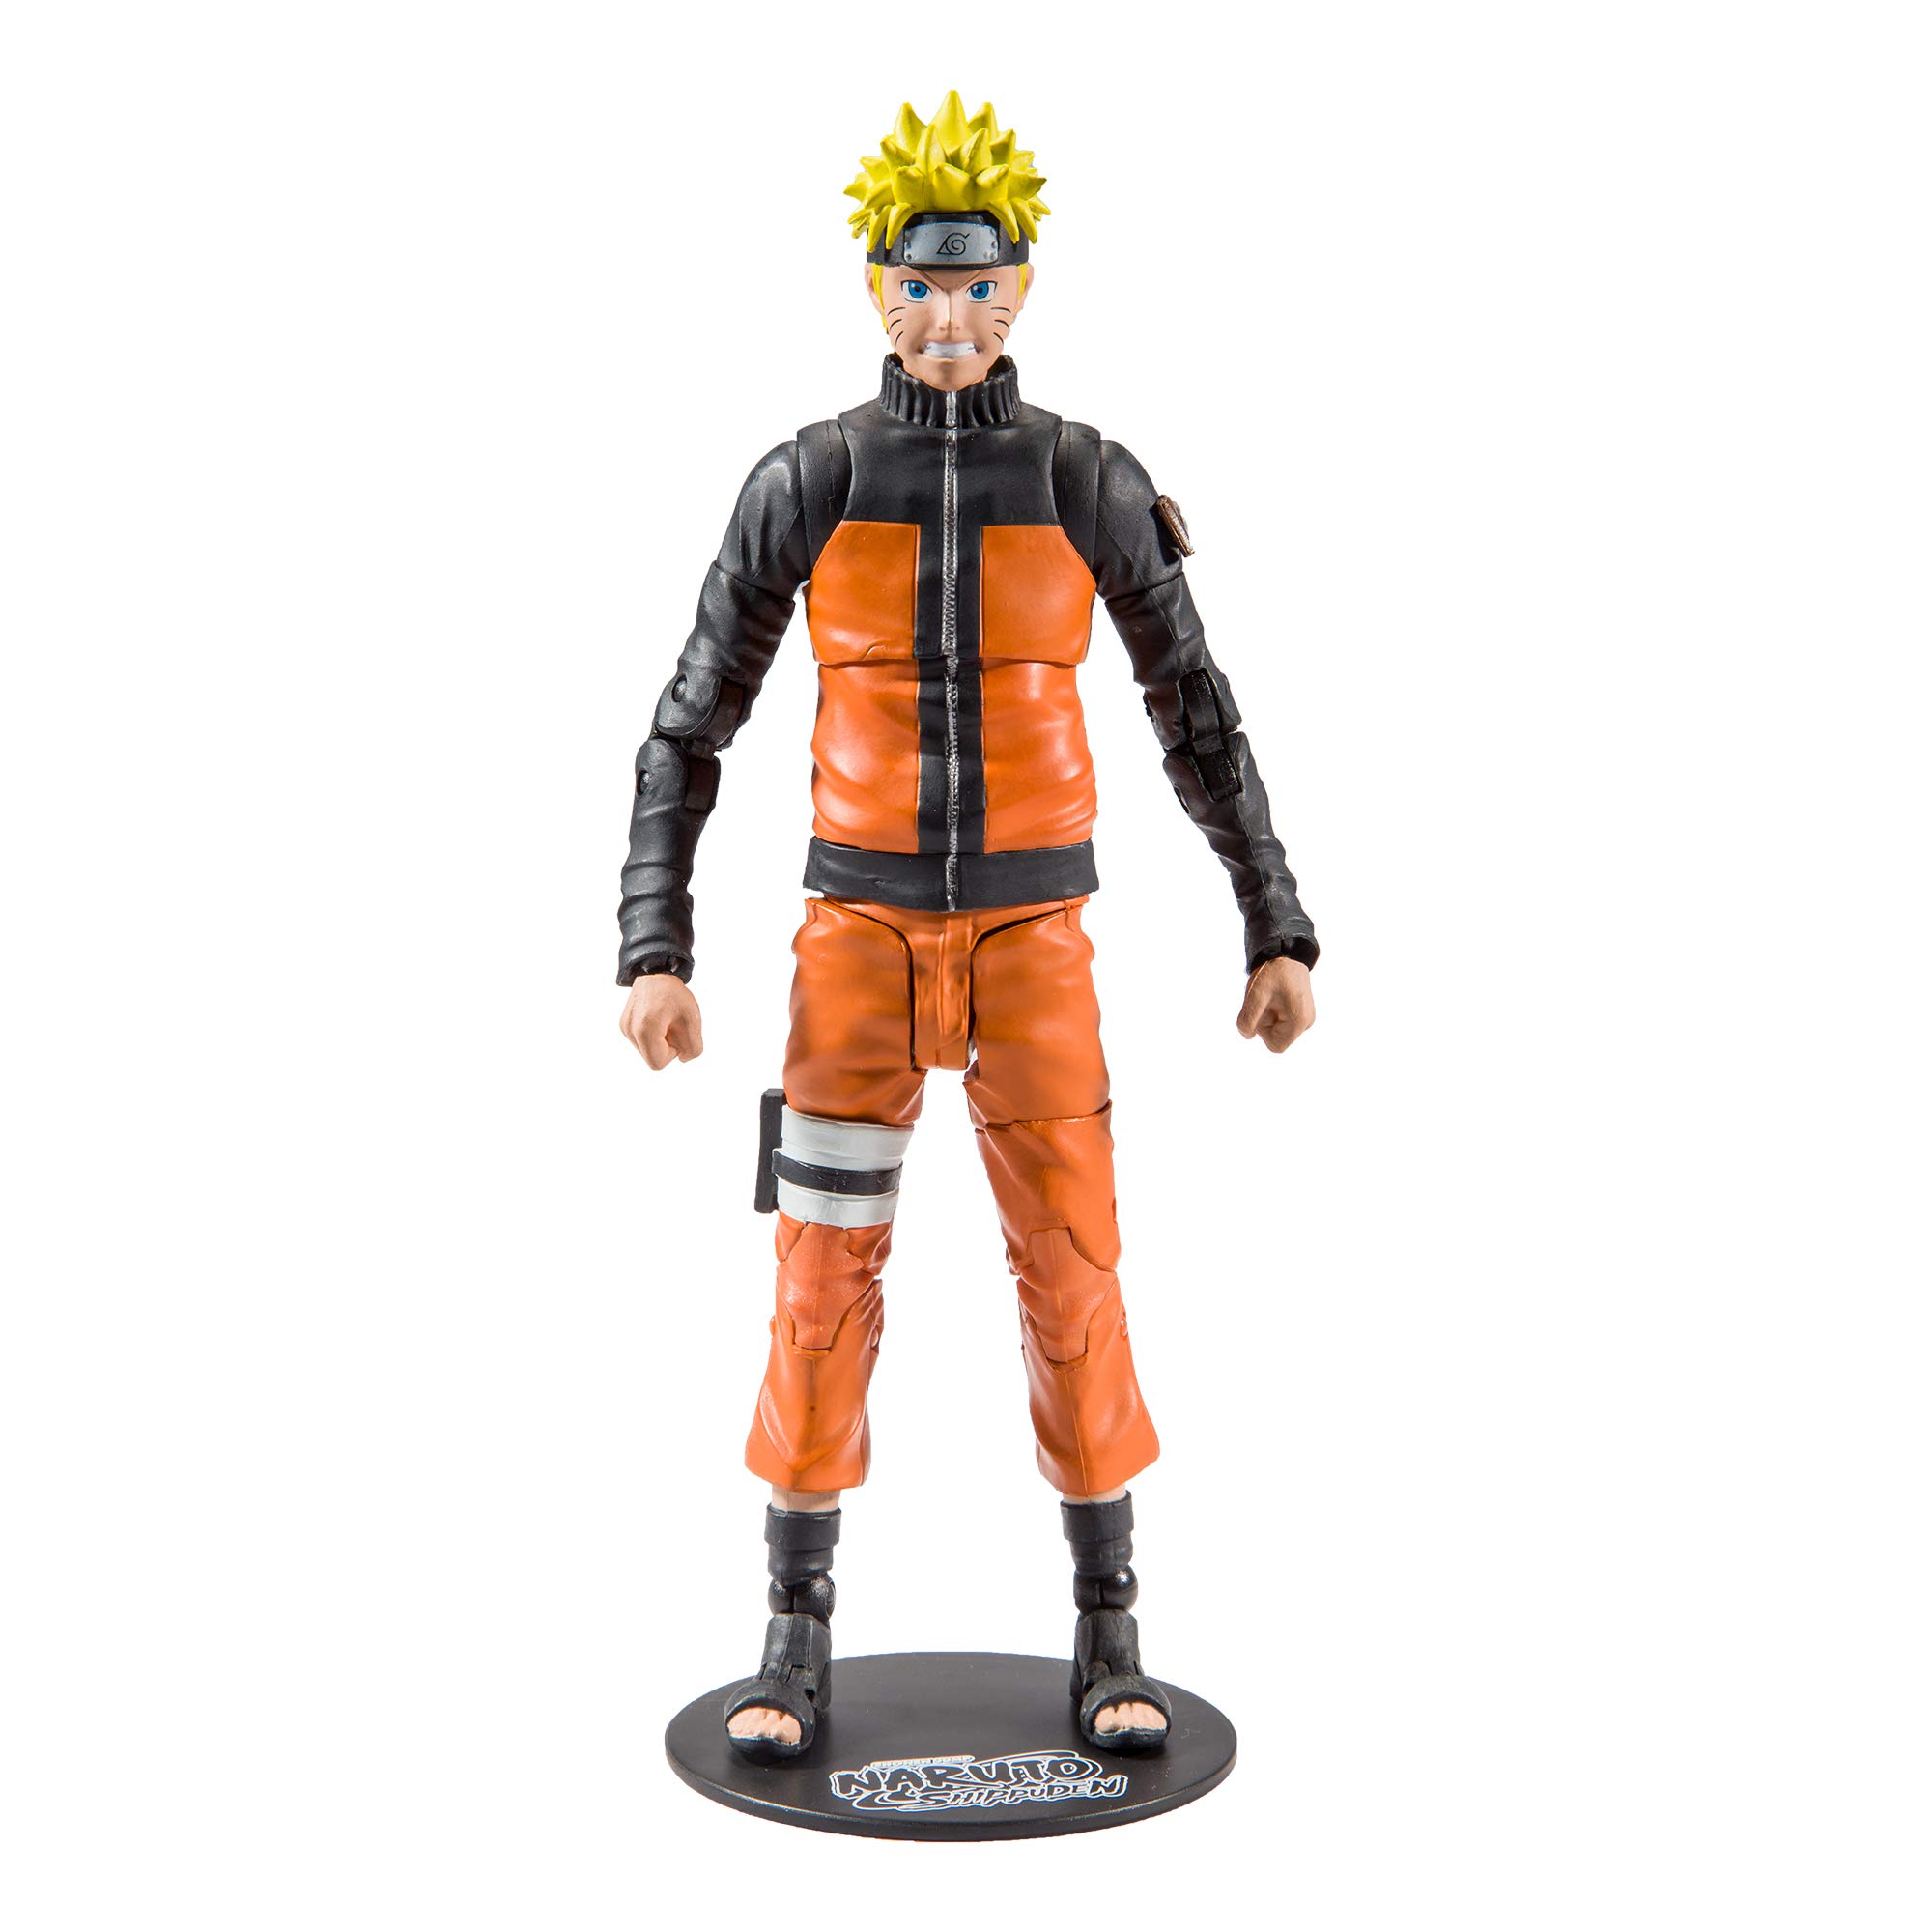 Anime Heroes Naruto - Gaara Collectable Action Figure at Toys R Us UK